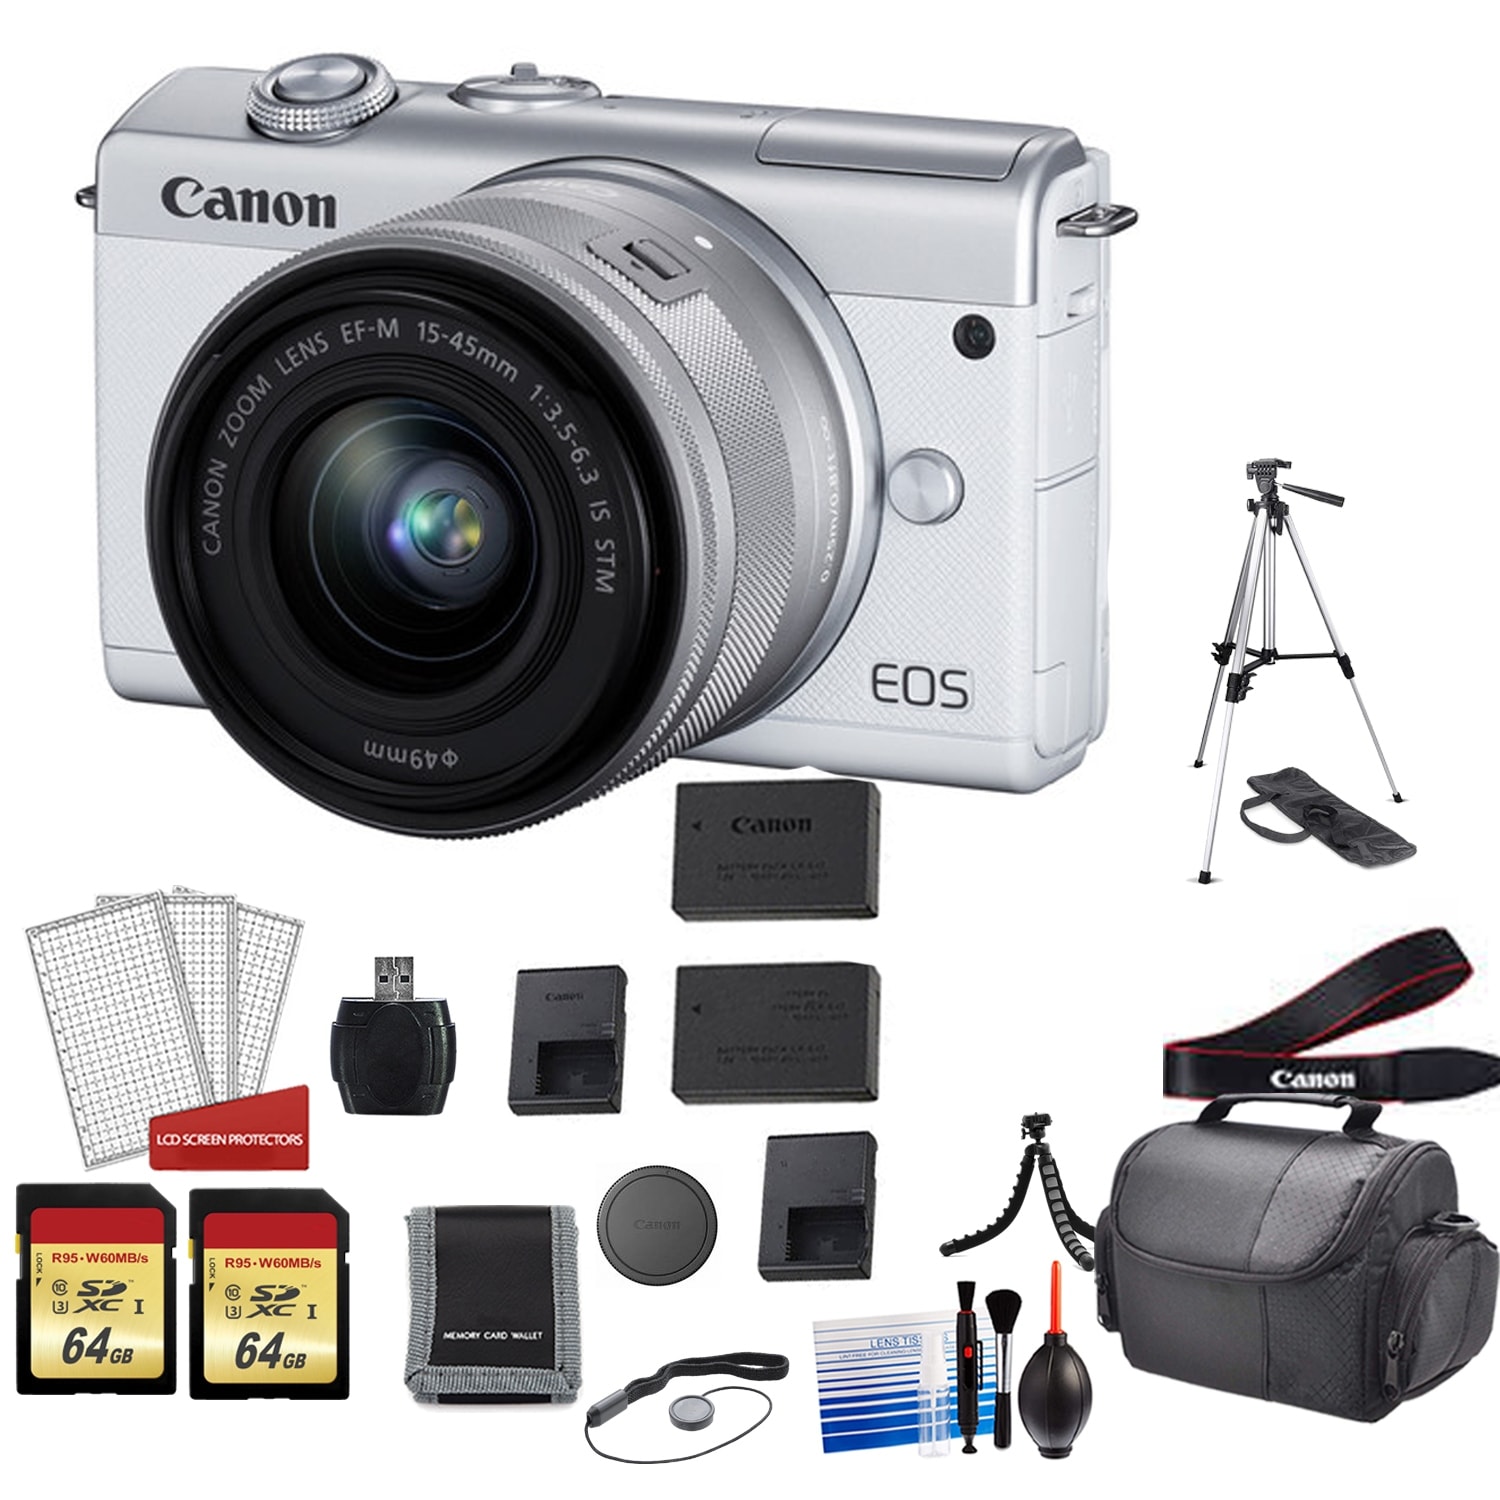 Canon EOS M200 Mirrorless Digital Camera with 15-45mm Lens (White) Kit